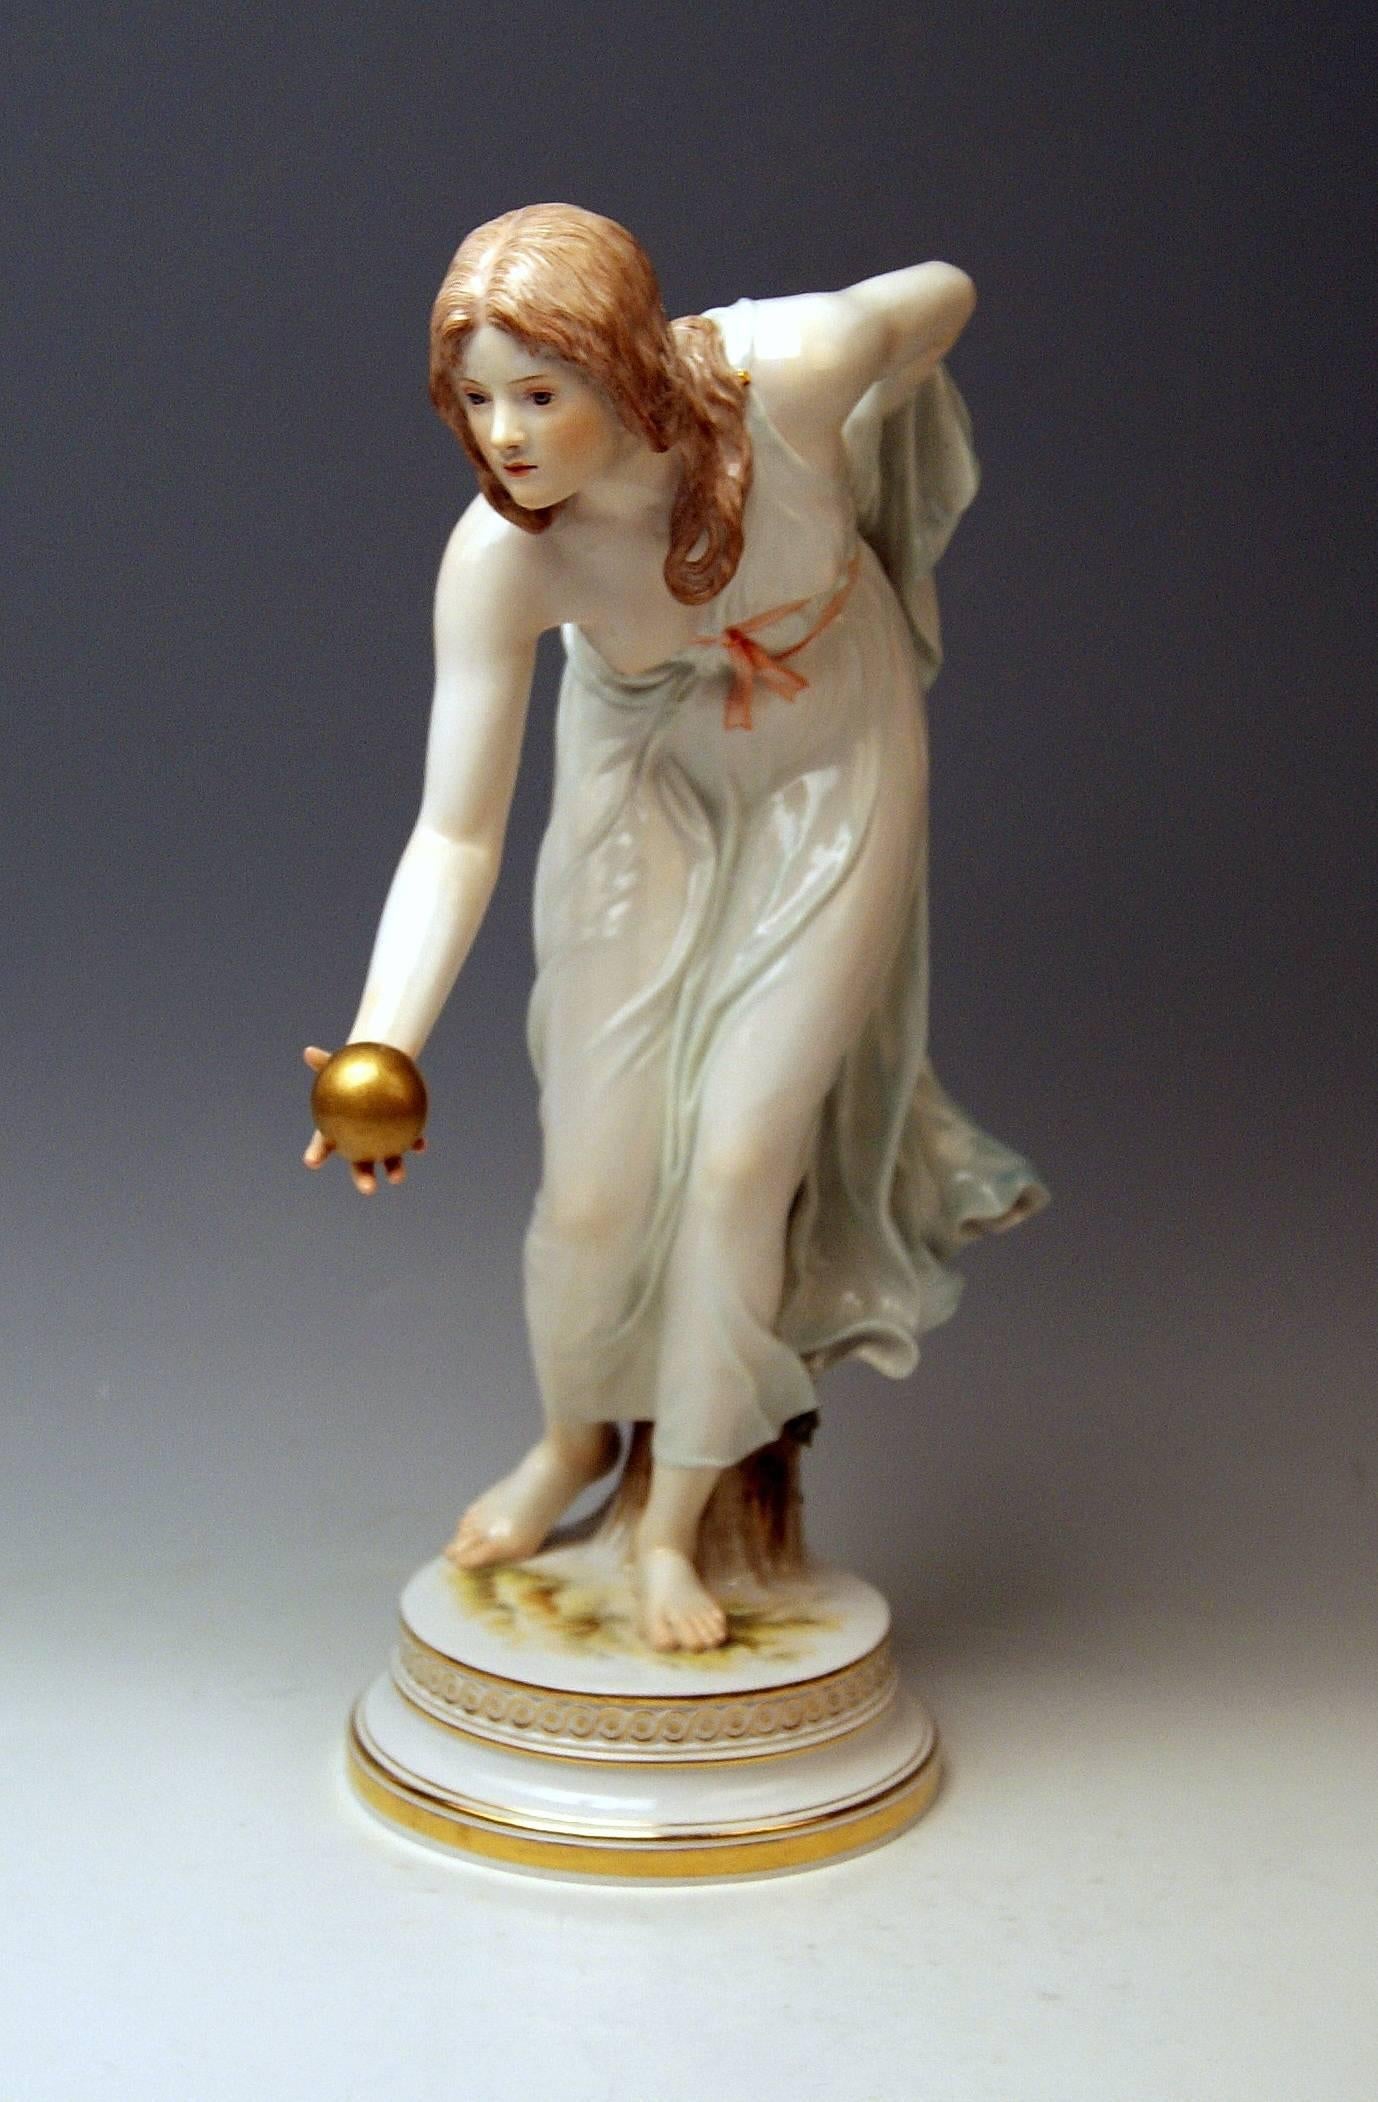 Meissen lovely girl playing bowls
Gorgeous Art Nouveau porcelain figurine / created by Walter Schott in 1898 / quite early manufacturing (made circa 1900)!
First quality

Meissen blue sword mark with pommels on hilts (underglazed)
Model number